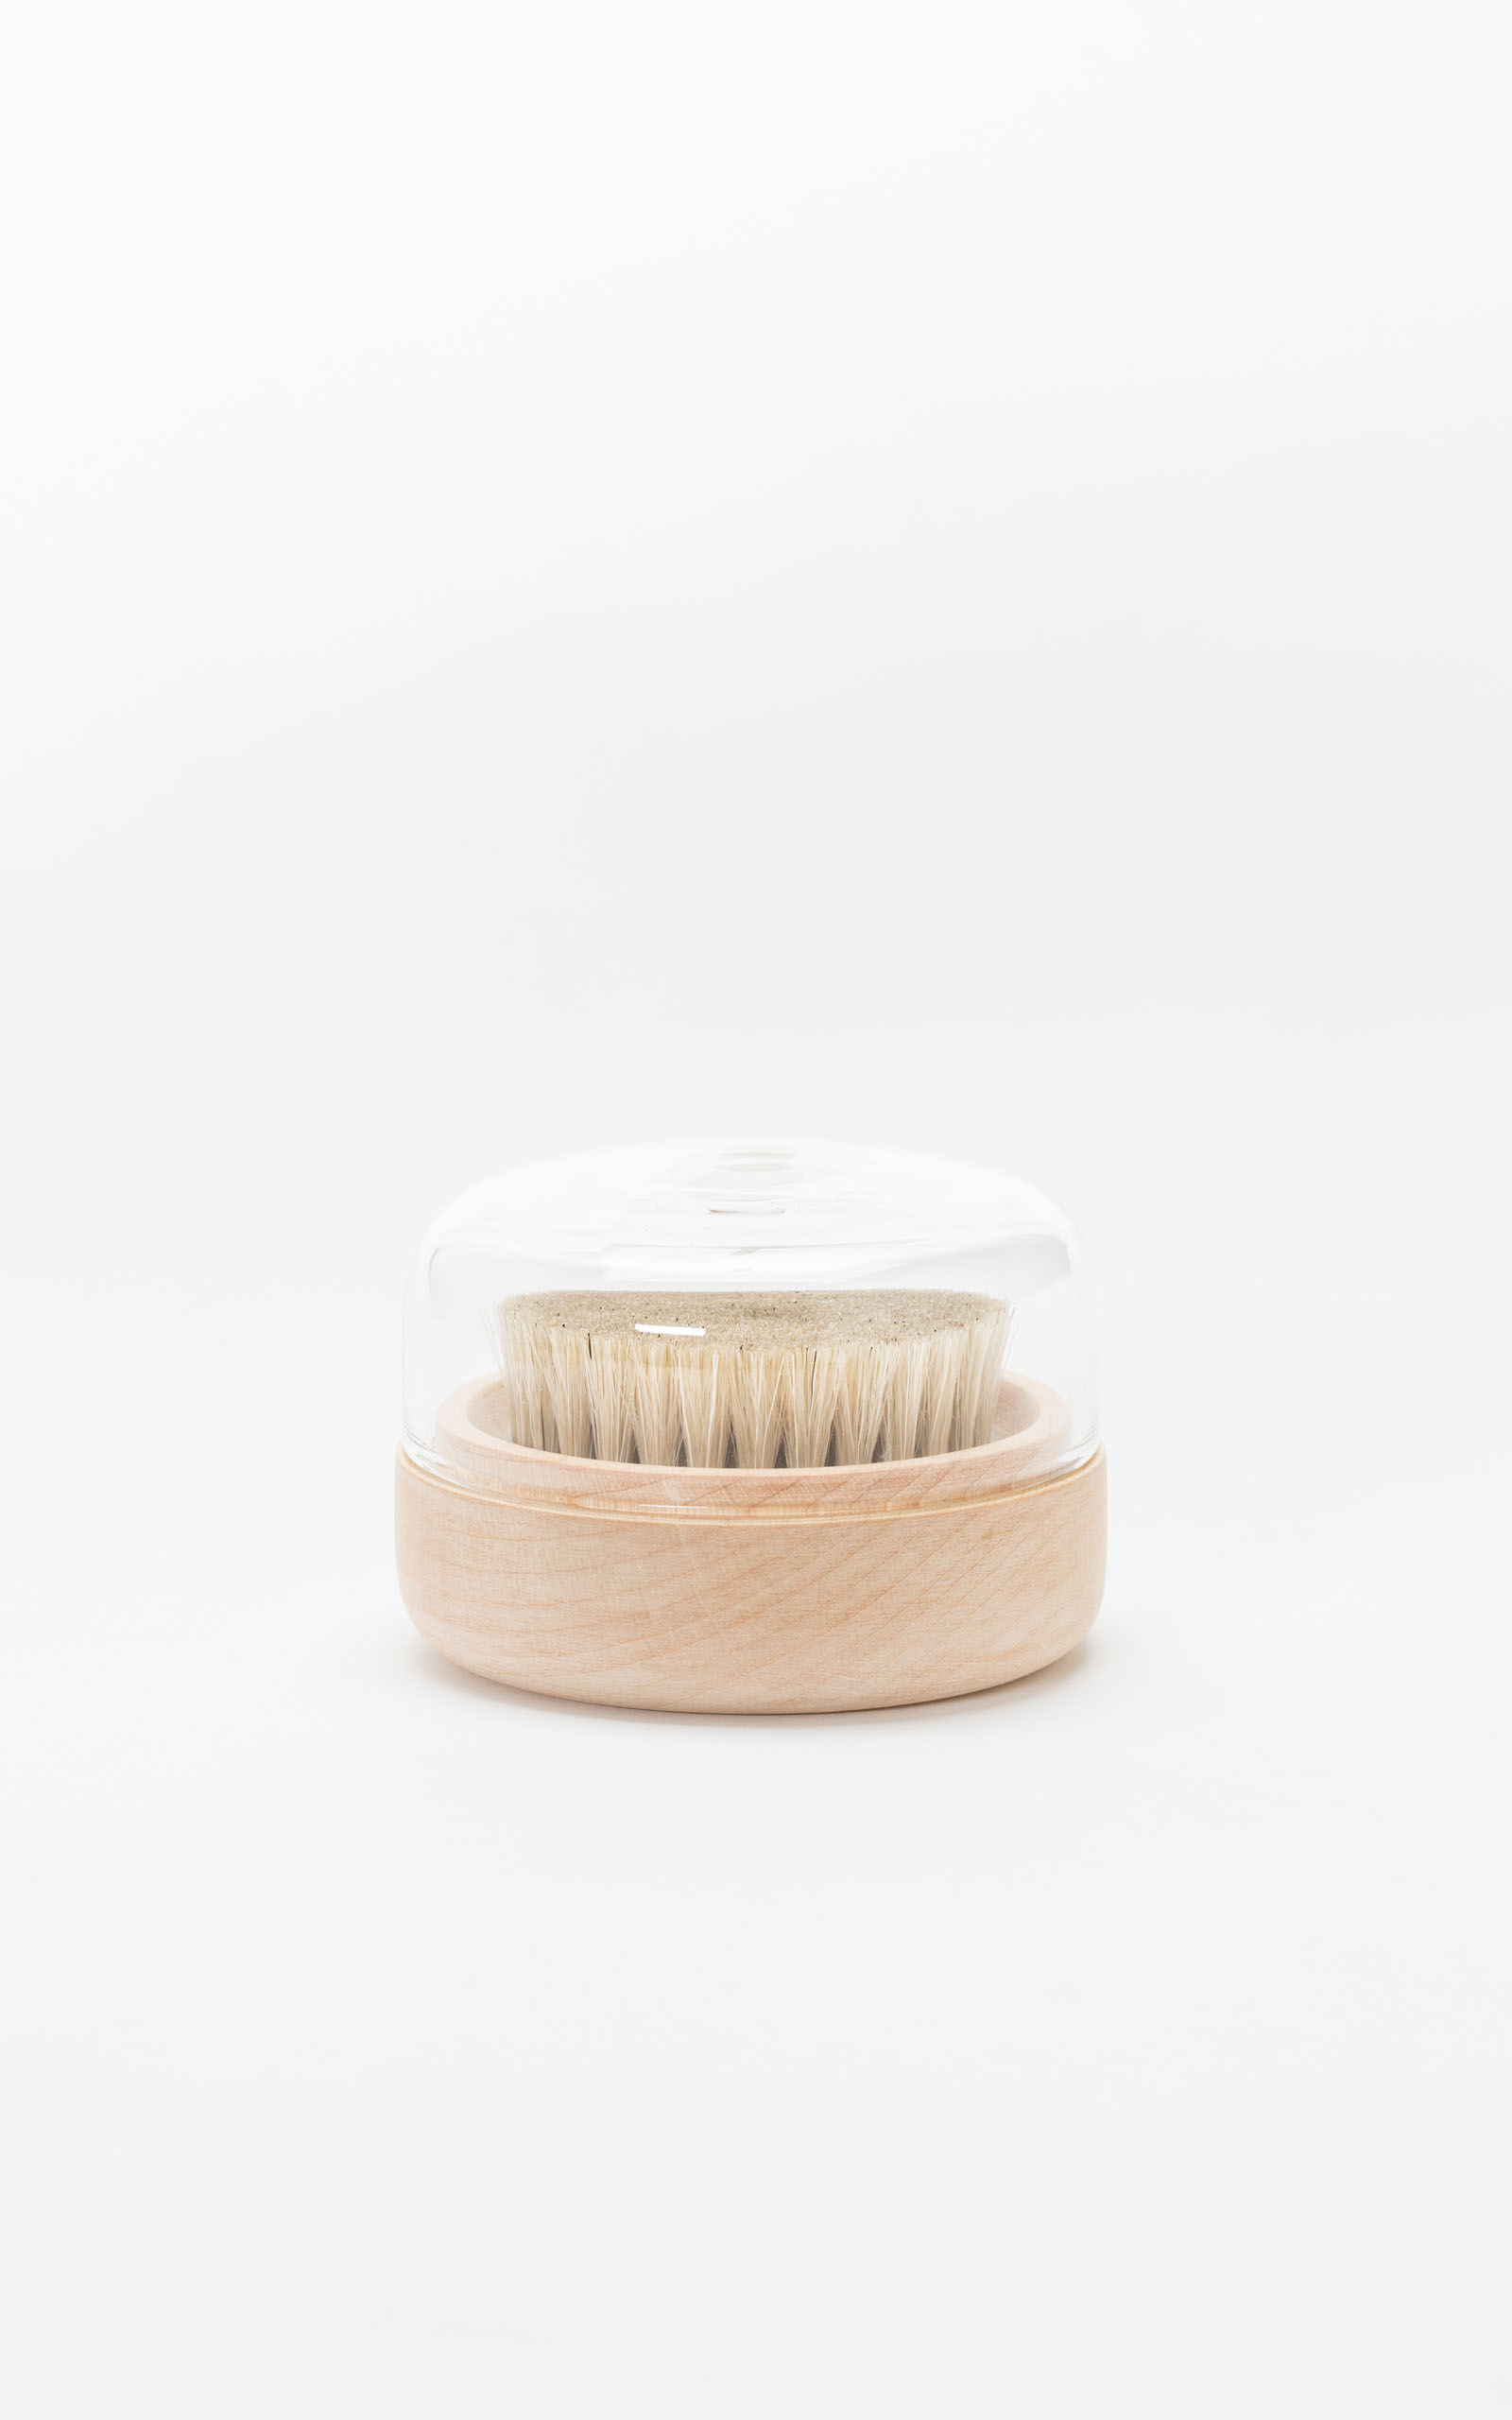 A clothing brush with a minimalistic glass top in front of a white backdrop.